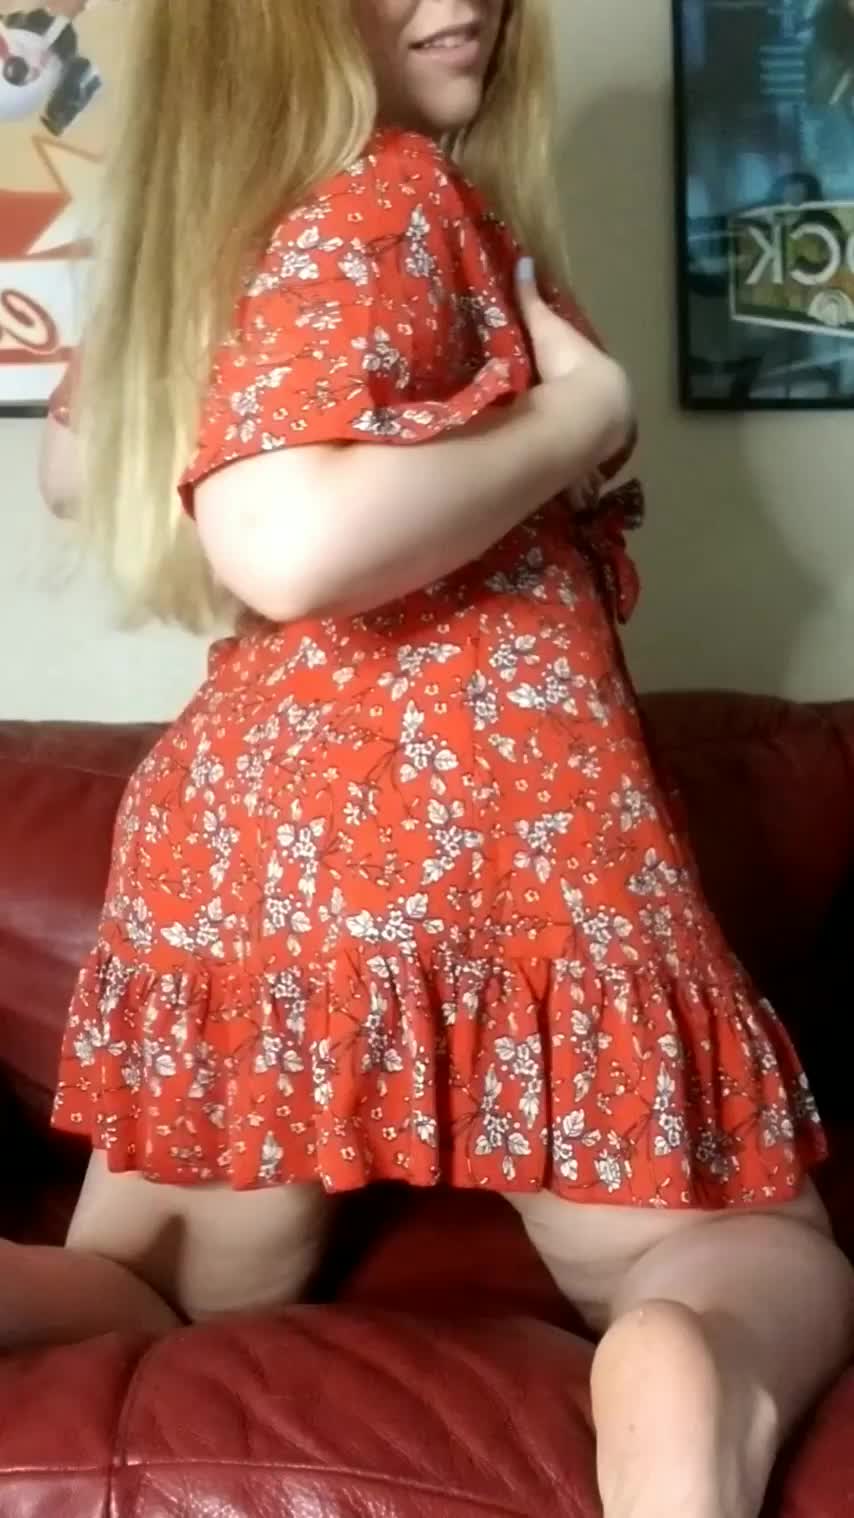 Sundresses are easier to breed in 😉 : video clip